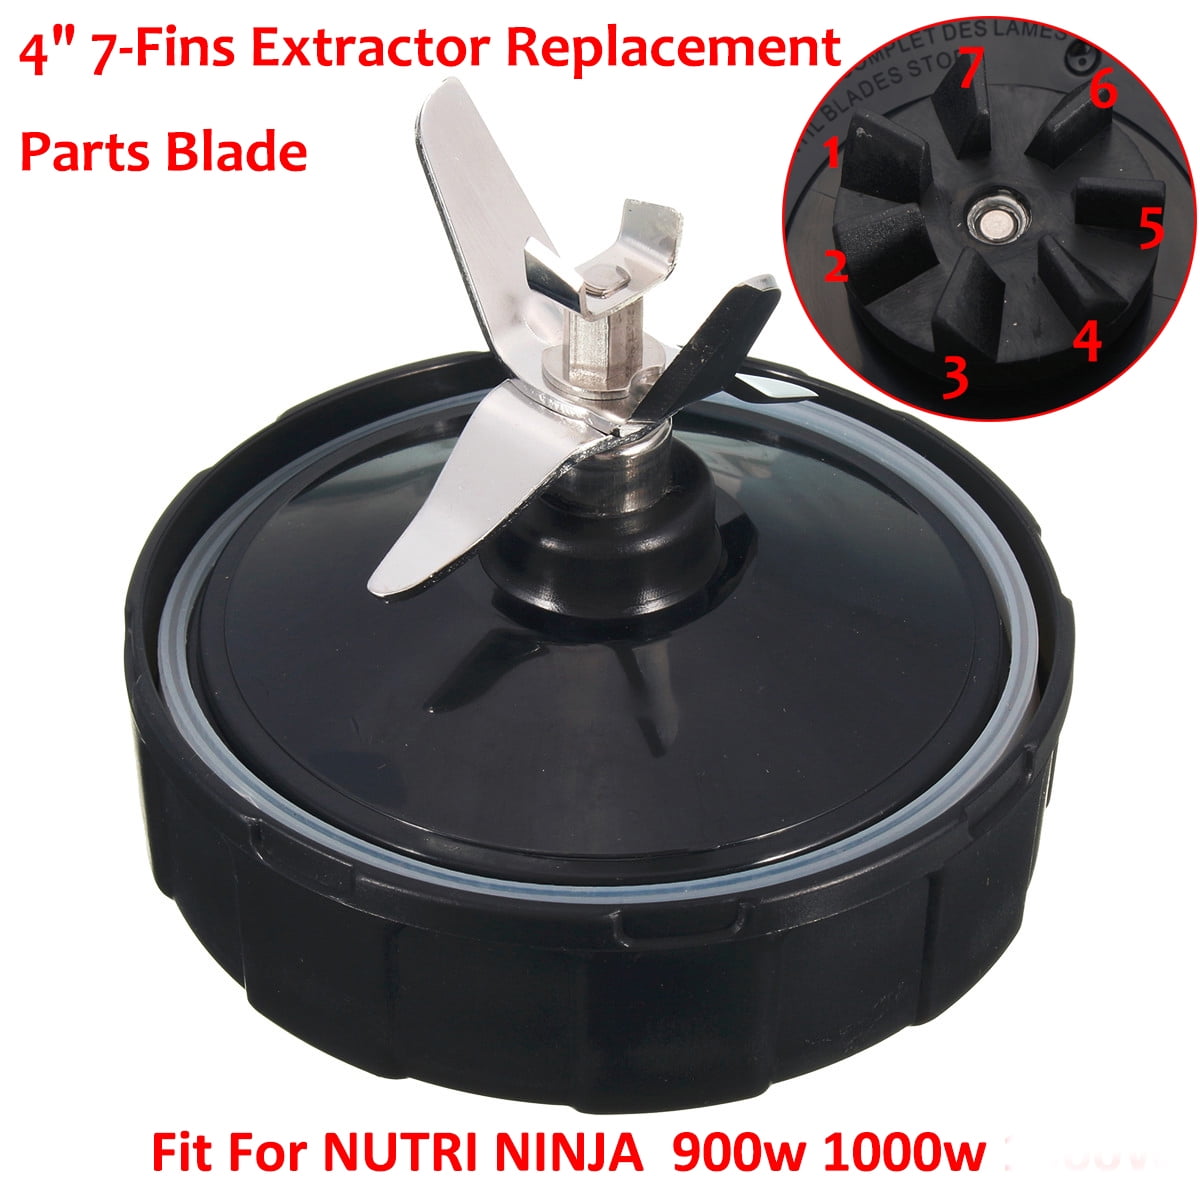 8 Pieces Blender Replacement Parts Compatible with Nutri Ninja,5 Fins  Extractor Blade with 2 16oz Cups & 2 To-Go Lids & 3 Rubber Gasket  Accessories